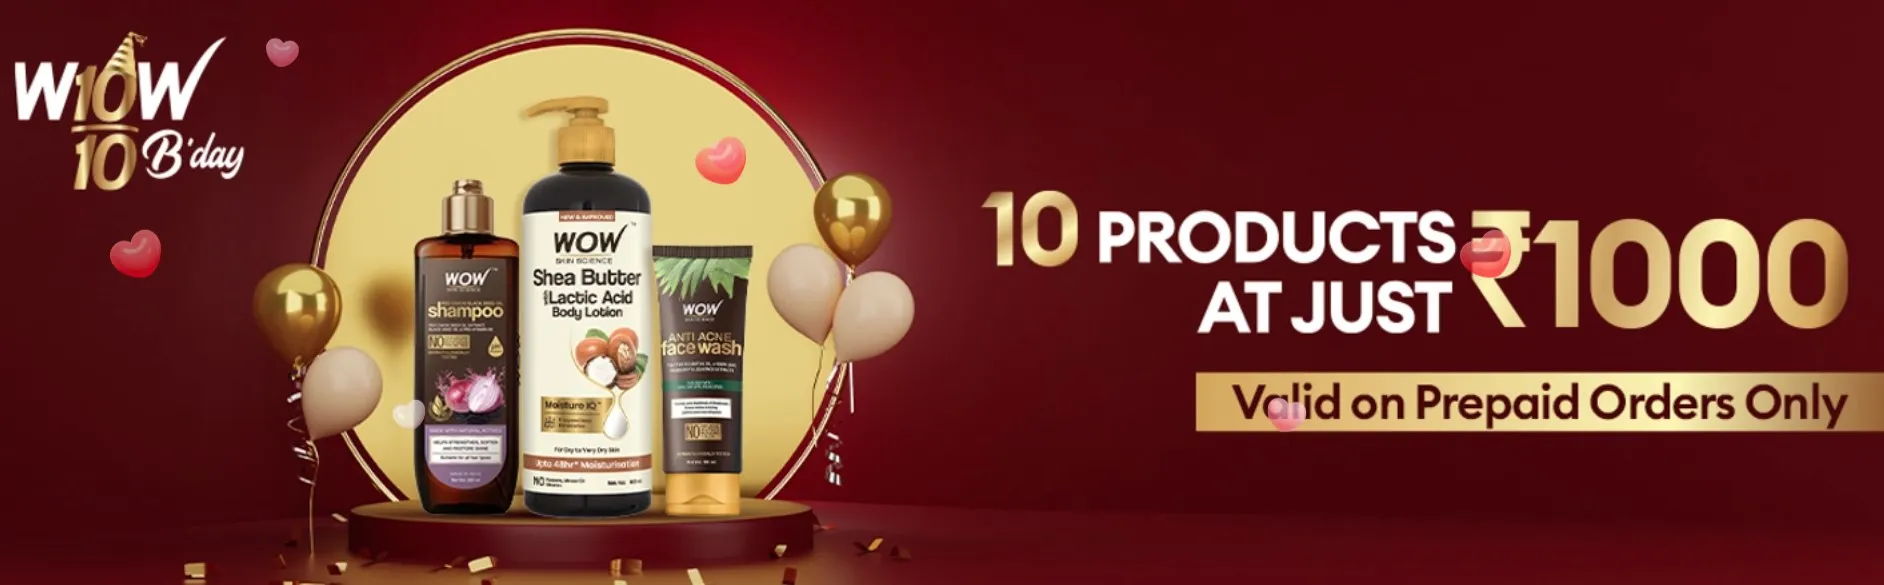 wow 10 products